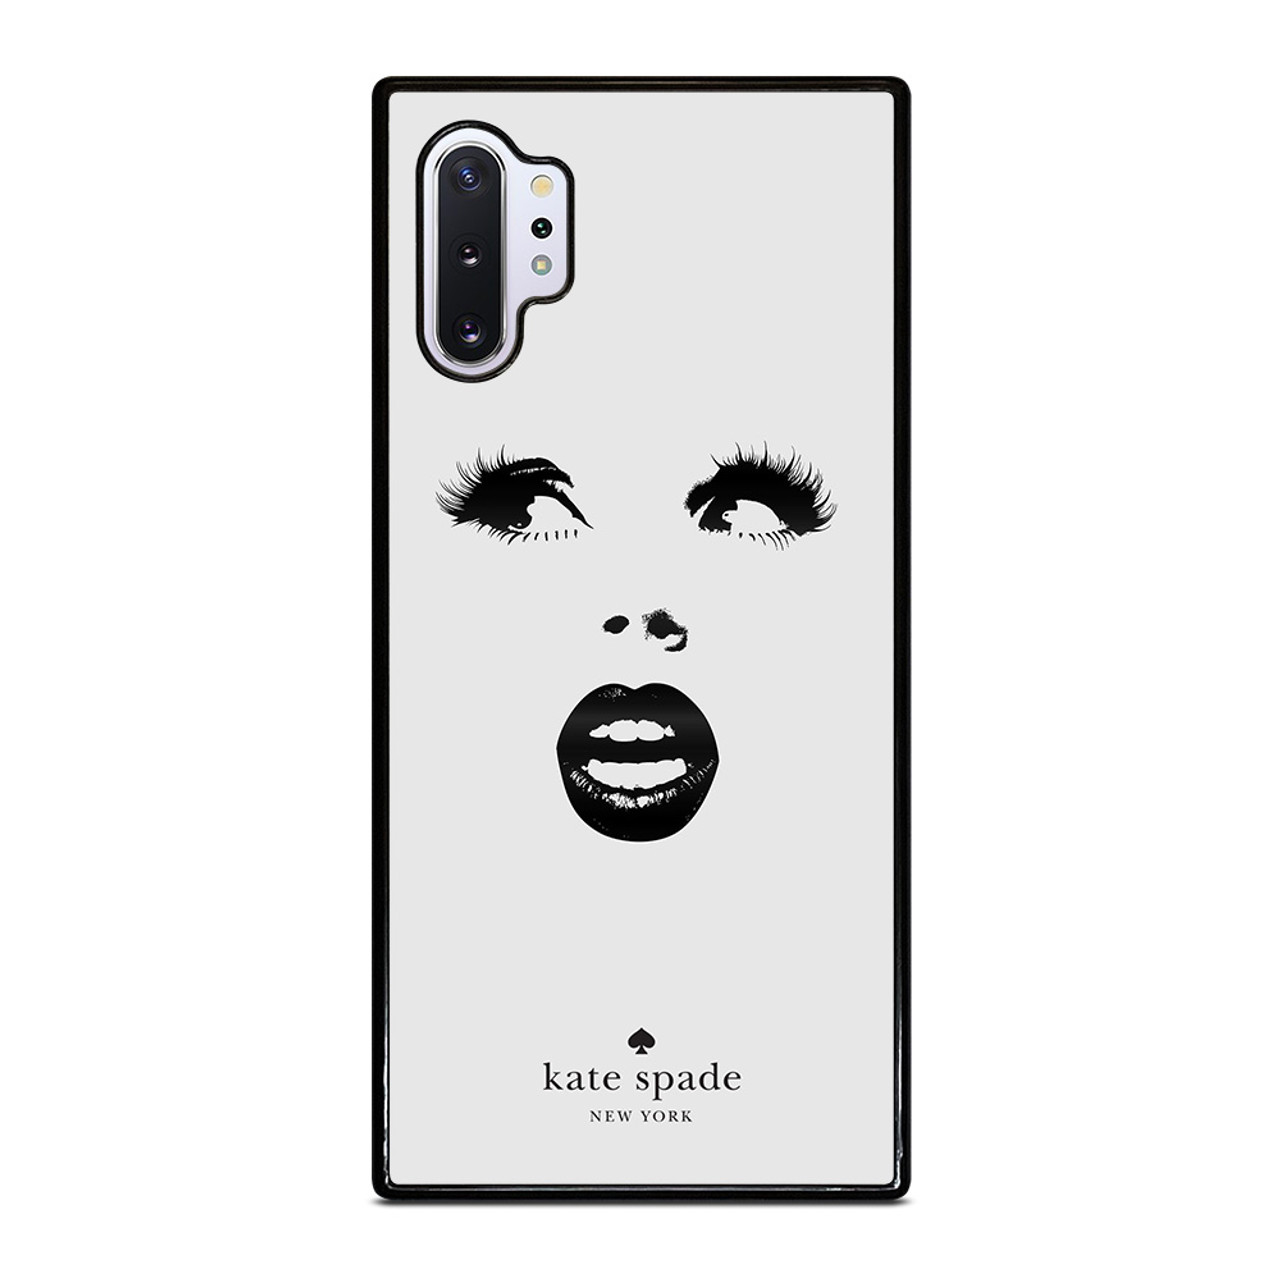 KATE SPADE BLACK WHITE FACE Samsung Galaxy Note 10 Plus Case Cover